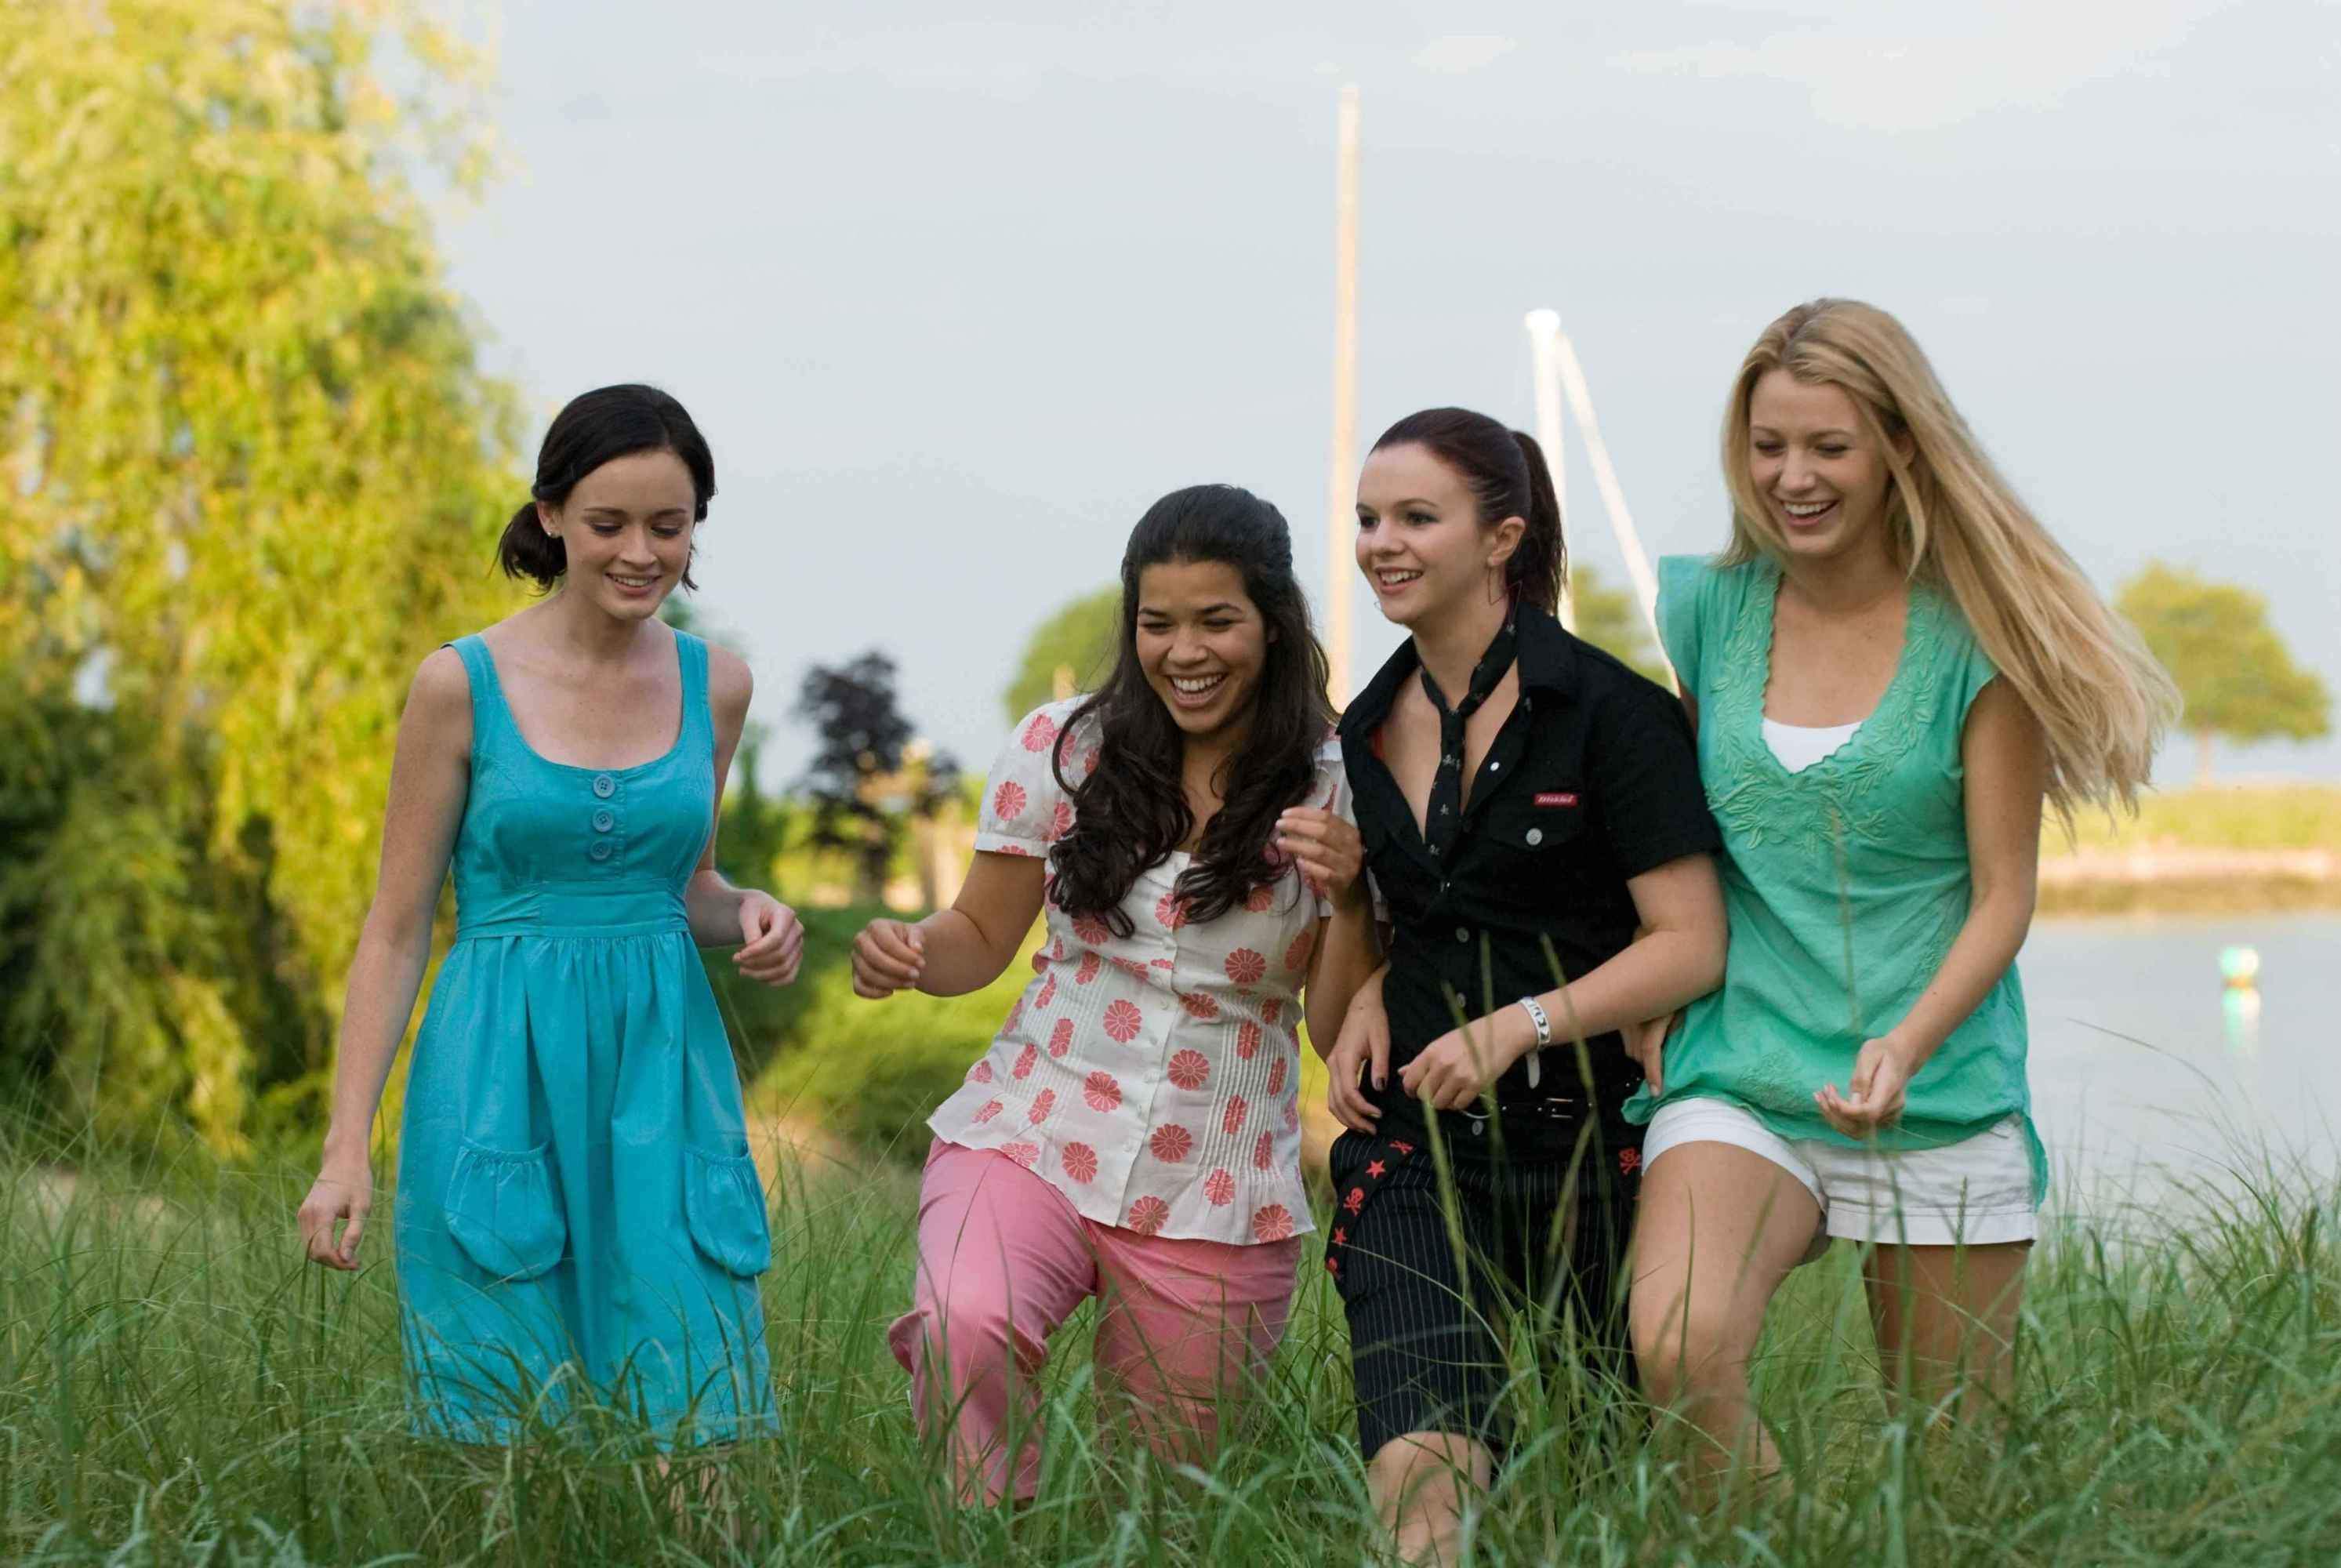 Alexis Bledel, America Ferrera, Amber Tamblyn and Blake Lively star in Warner Bros. Pictures' The Sisterhood of the Traveling Pants 2 (2008)